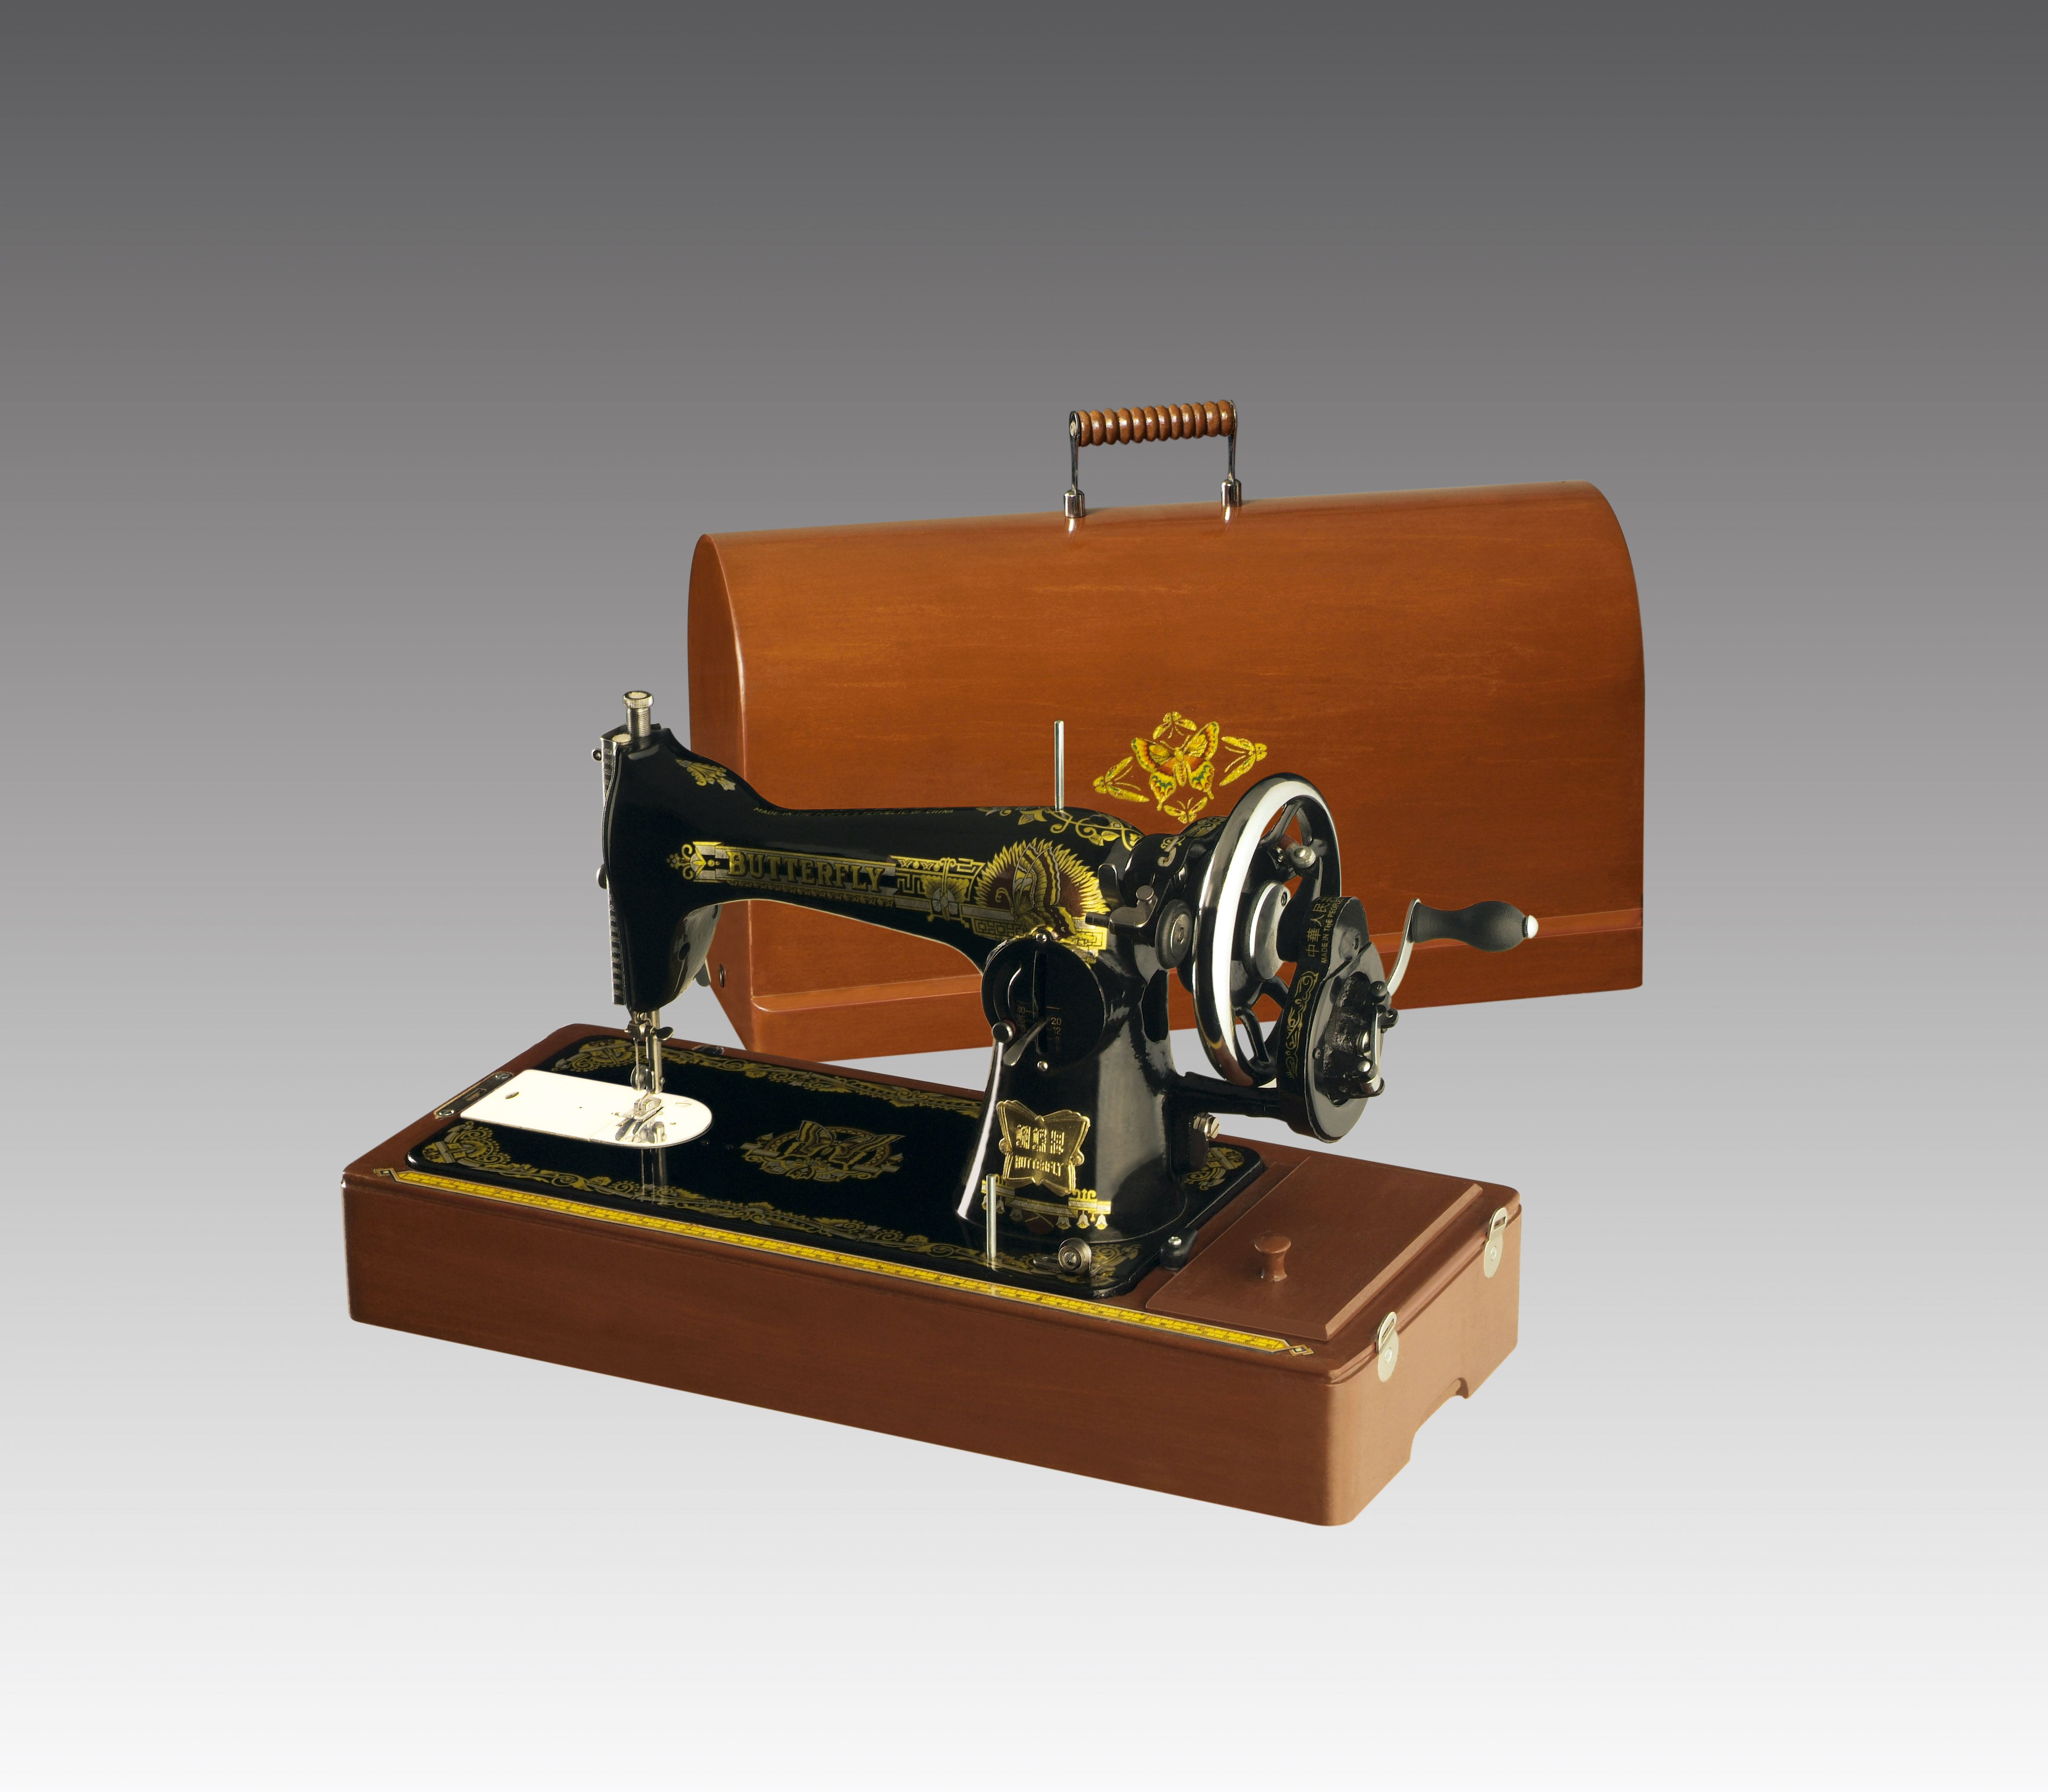 TRADITIONAL DOMESTIC SEWING MACHINE